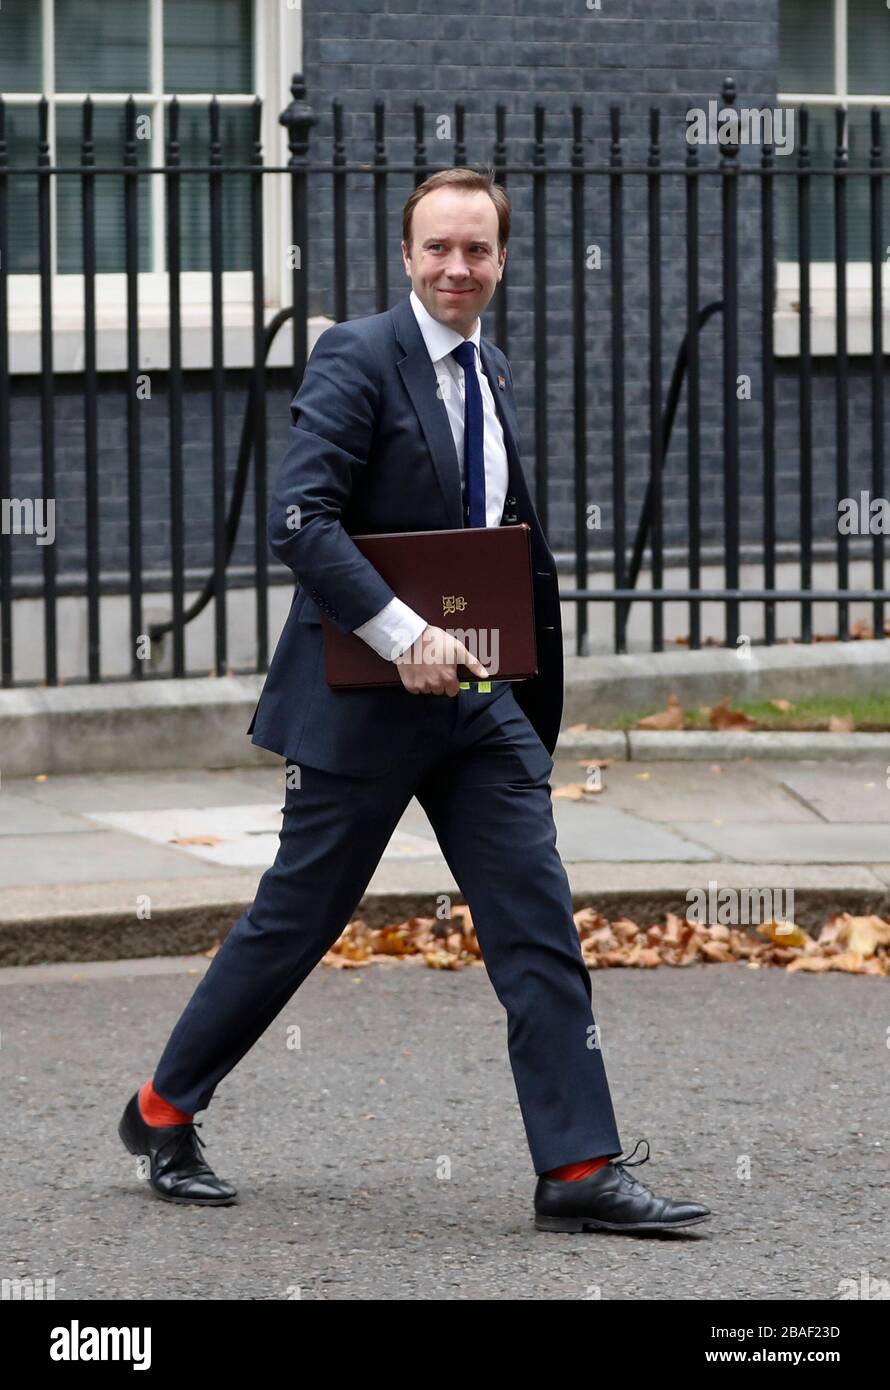 (200327) -- LONDON, March 27, 2020 (Xinhua) -- File photo taken on Nov. 26, 2018 shows British Health Secretary Matt Hancock leaving 10 Downing Street after a cabinet meeting in London, Britain. Matt Hancock on Friday said he has tested positive for COVID-19 after Prime Minister Boris Johnson was confirmed to have the novel coronavirus. (Xinhua/Han Yan) Stock Photo